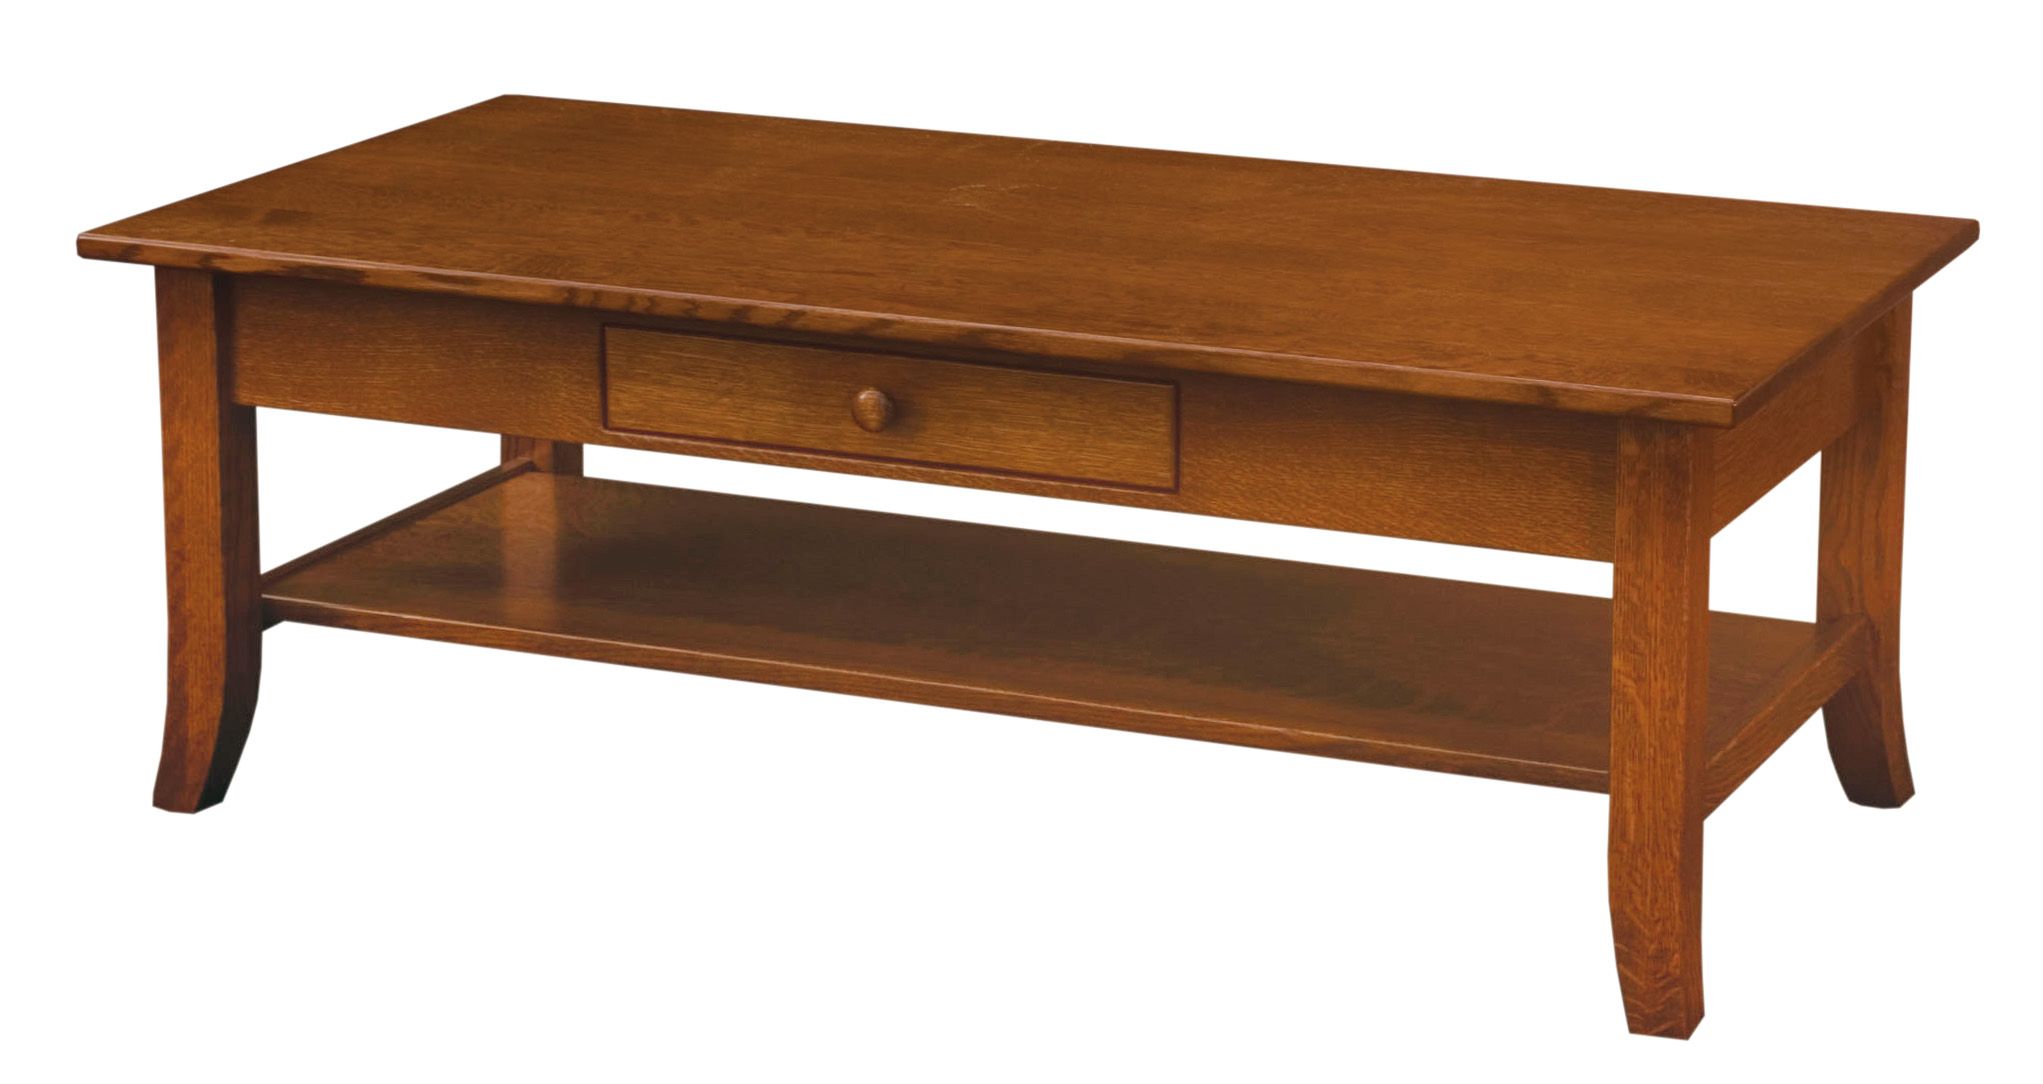 Dresbach Coffee Table | Amish Solid Wood Coffee Tables | Kvadro Furniture Intended For Pemberly Row Replicated Wood Coffee Tables (Gallery 16 of 20)